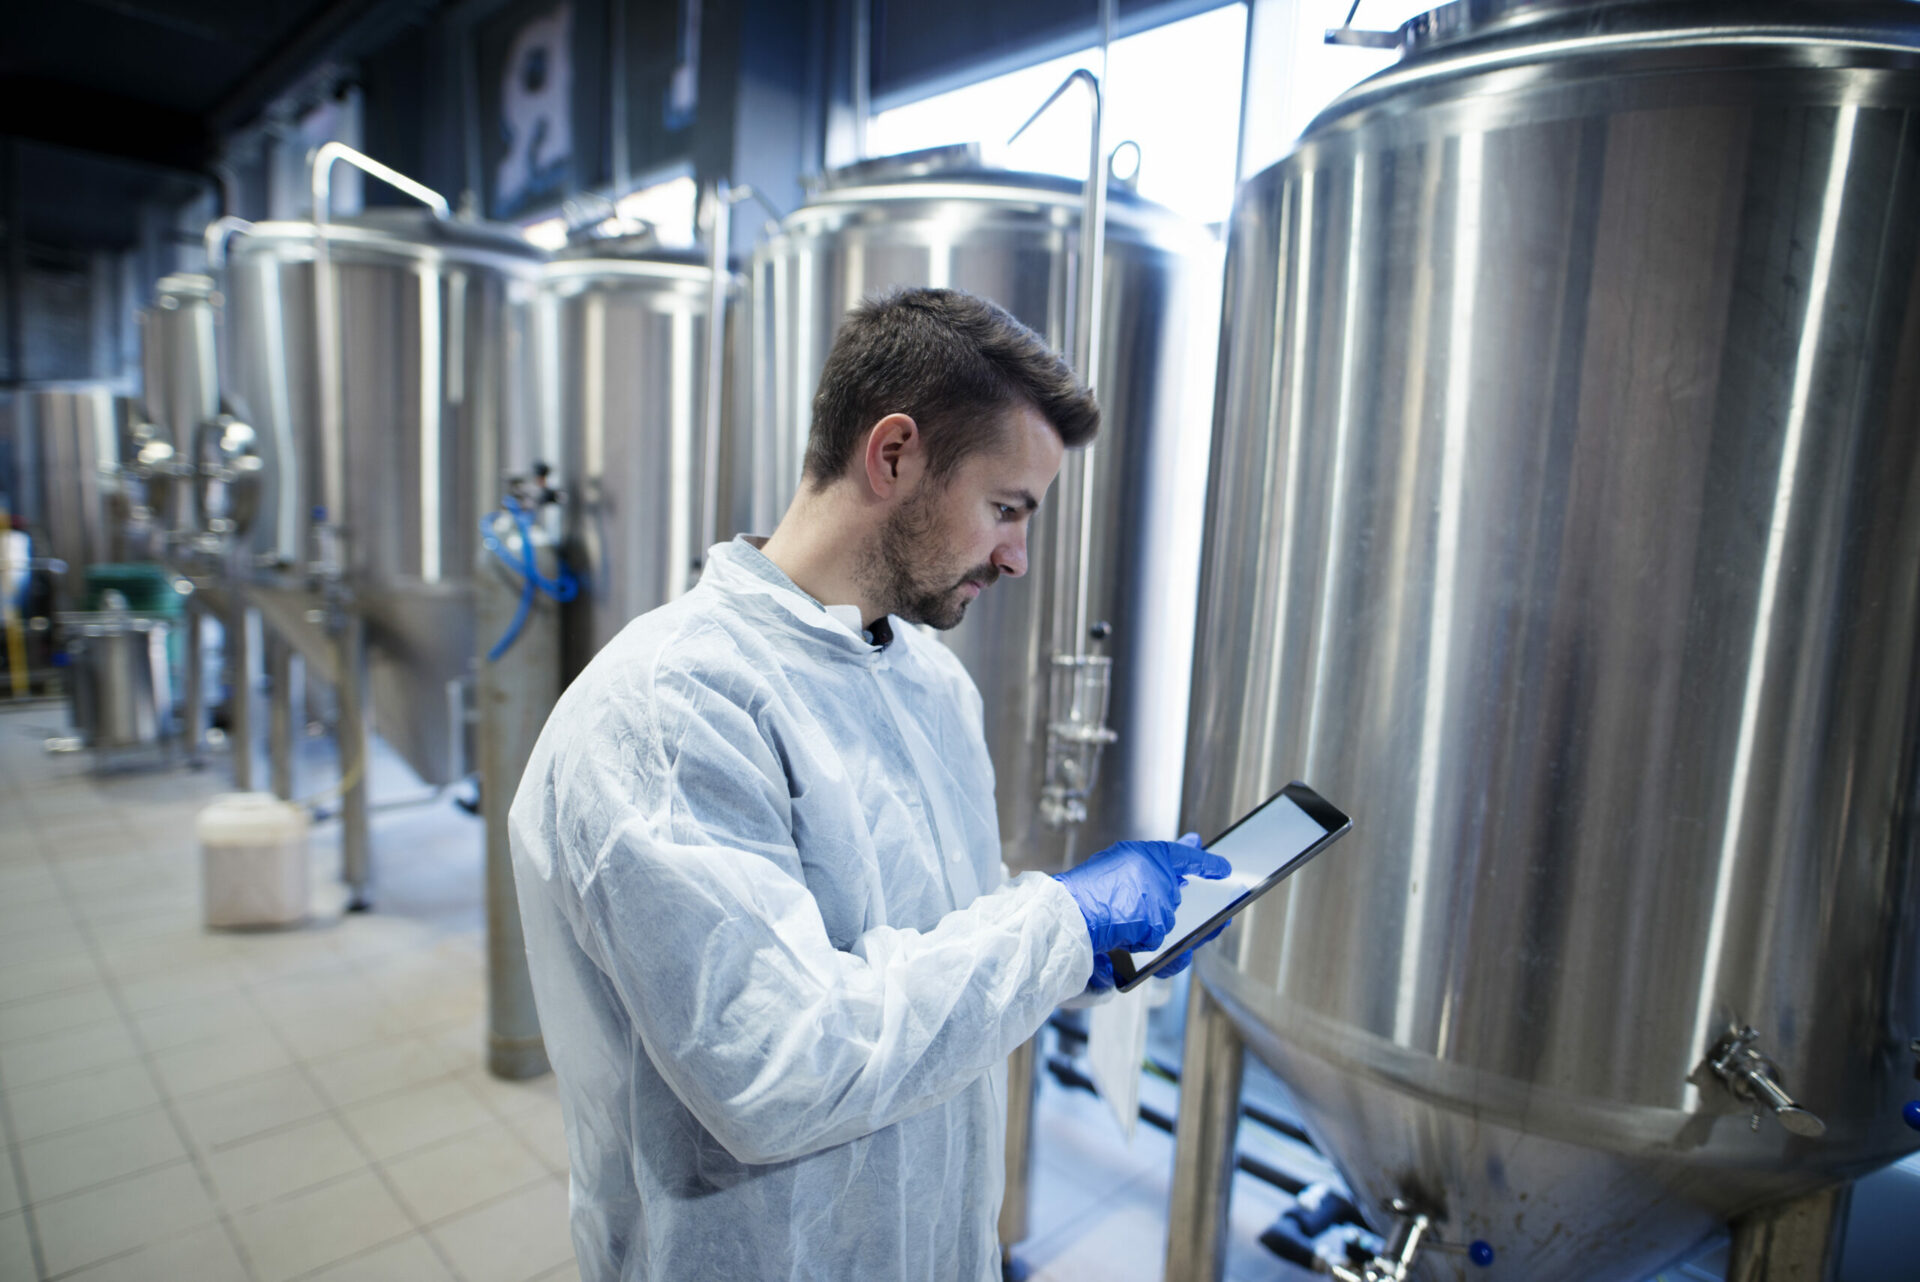 Technologist expert standing in food production plant and typing on his tablet computer.